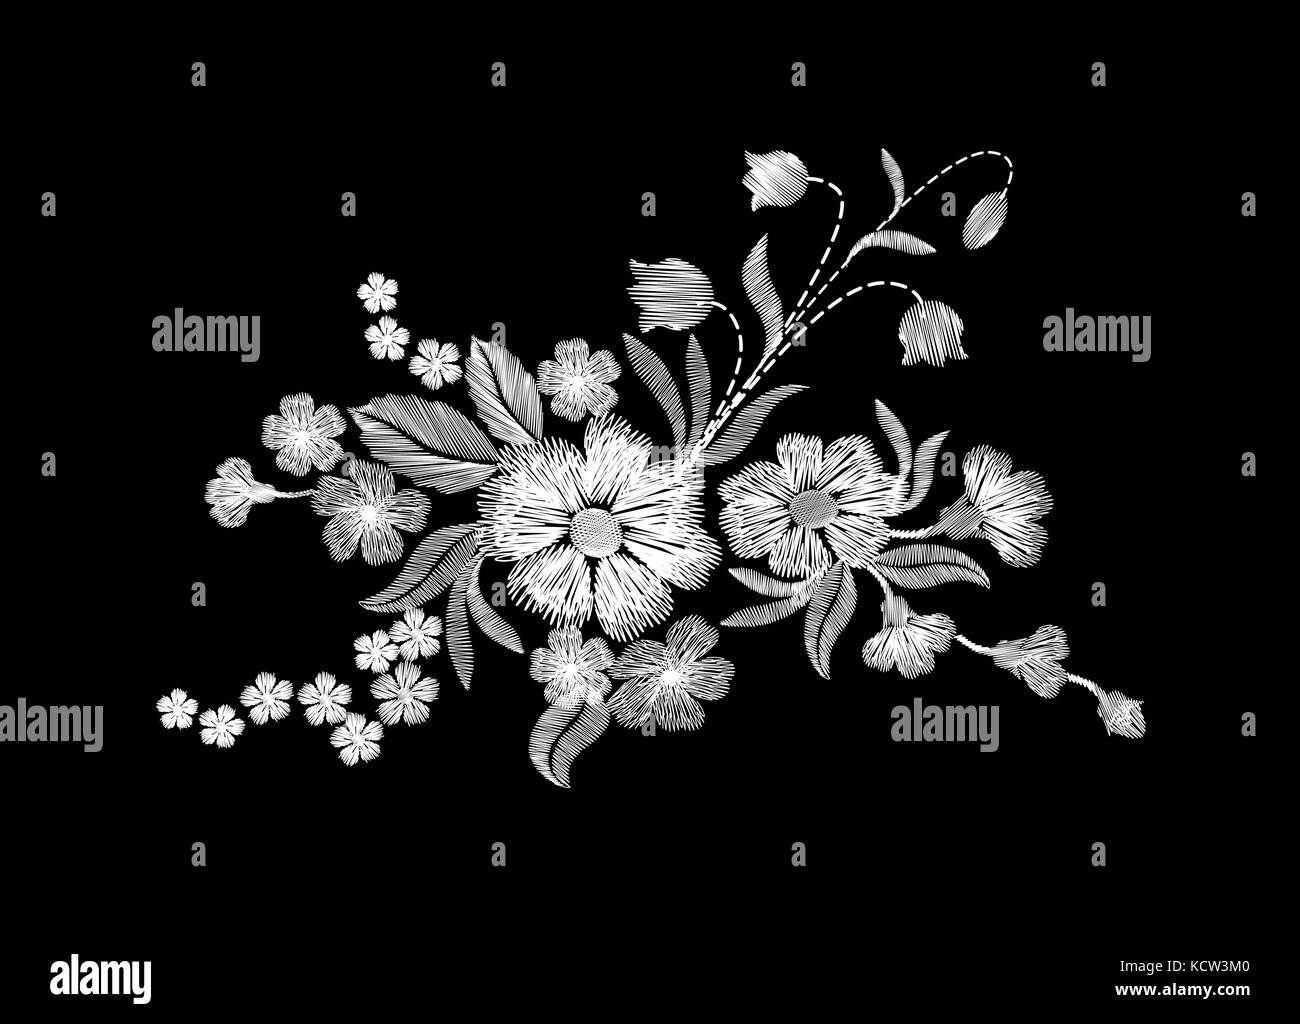 Embroidery white wild flowers on a black background. imitation lace. fashionable clothing decoration. traditional pattern. vector illustration Stock Vector